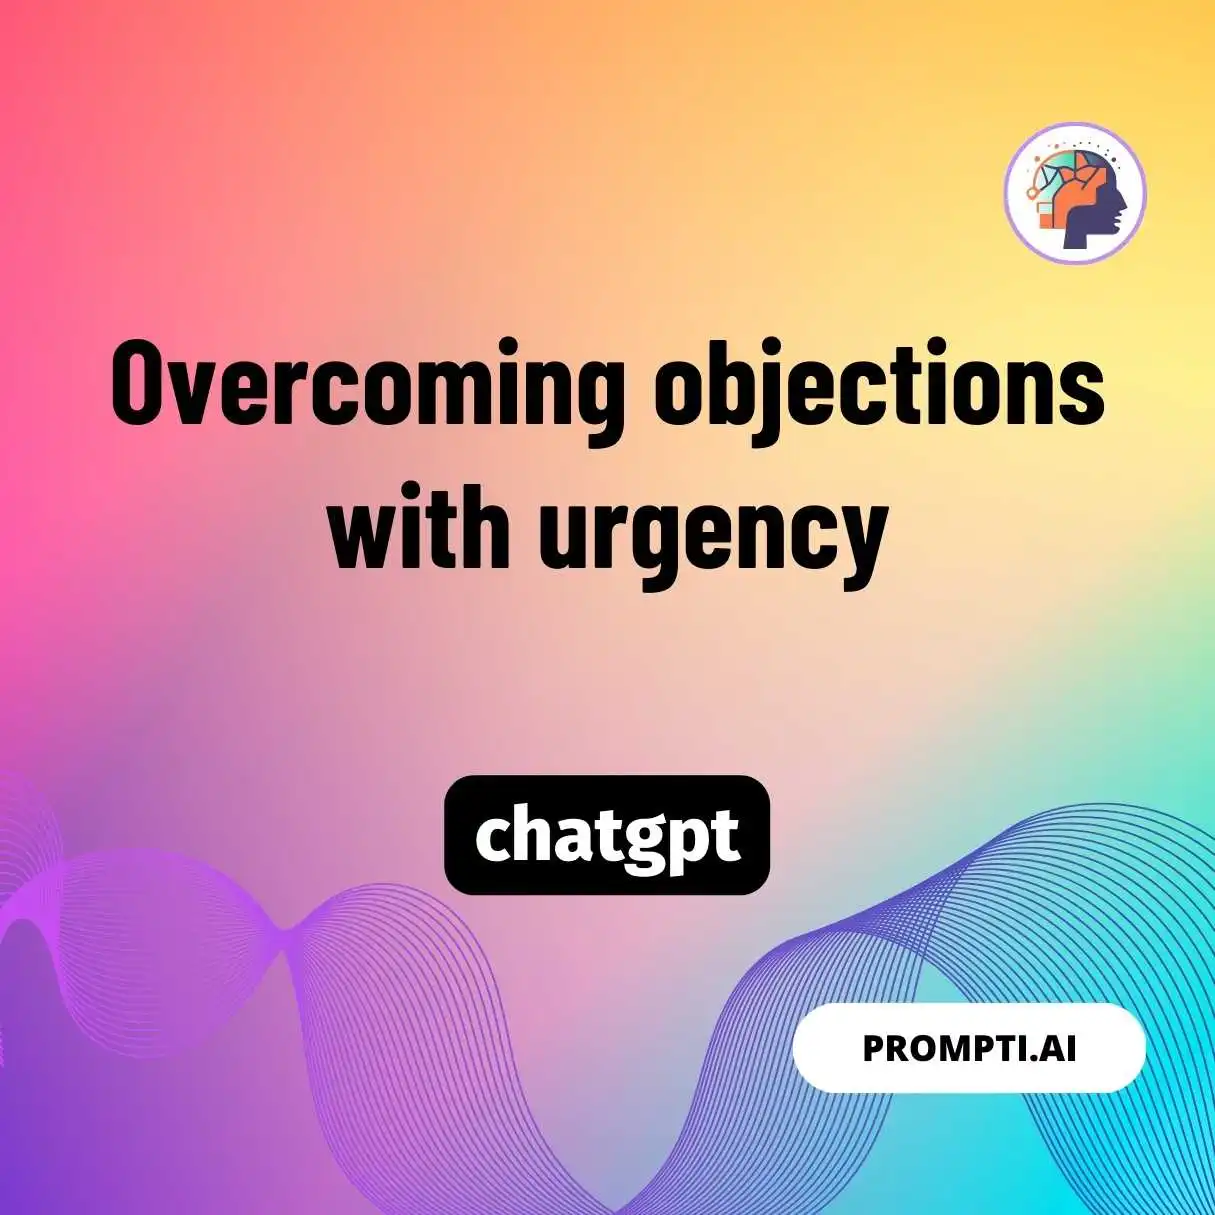 Overcoming objections with urgency